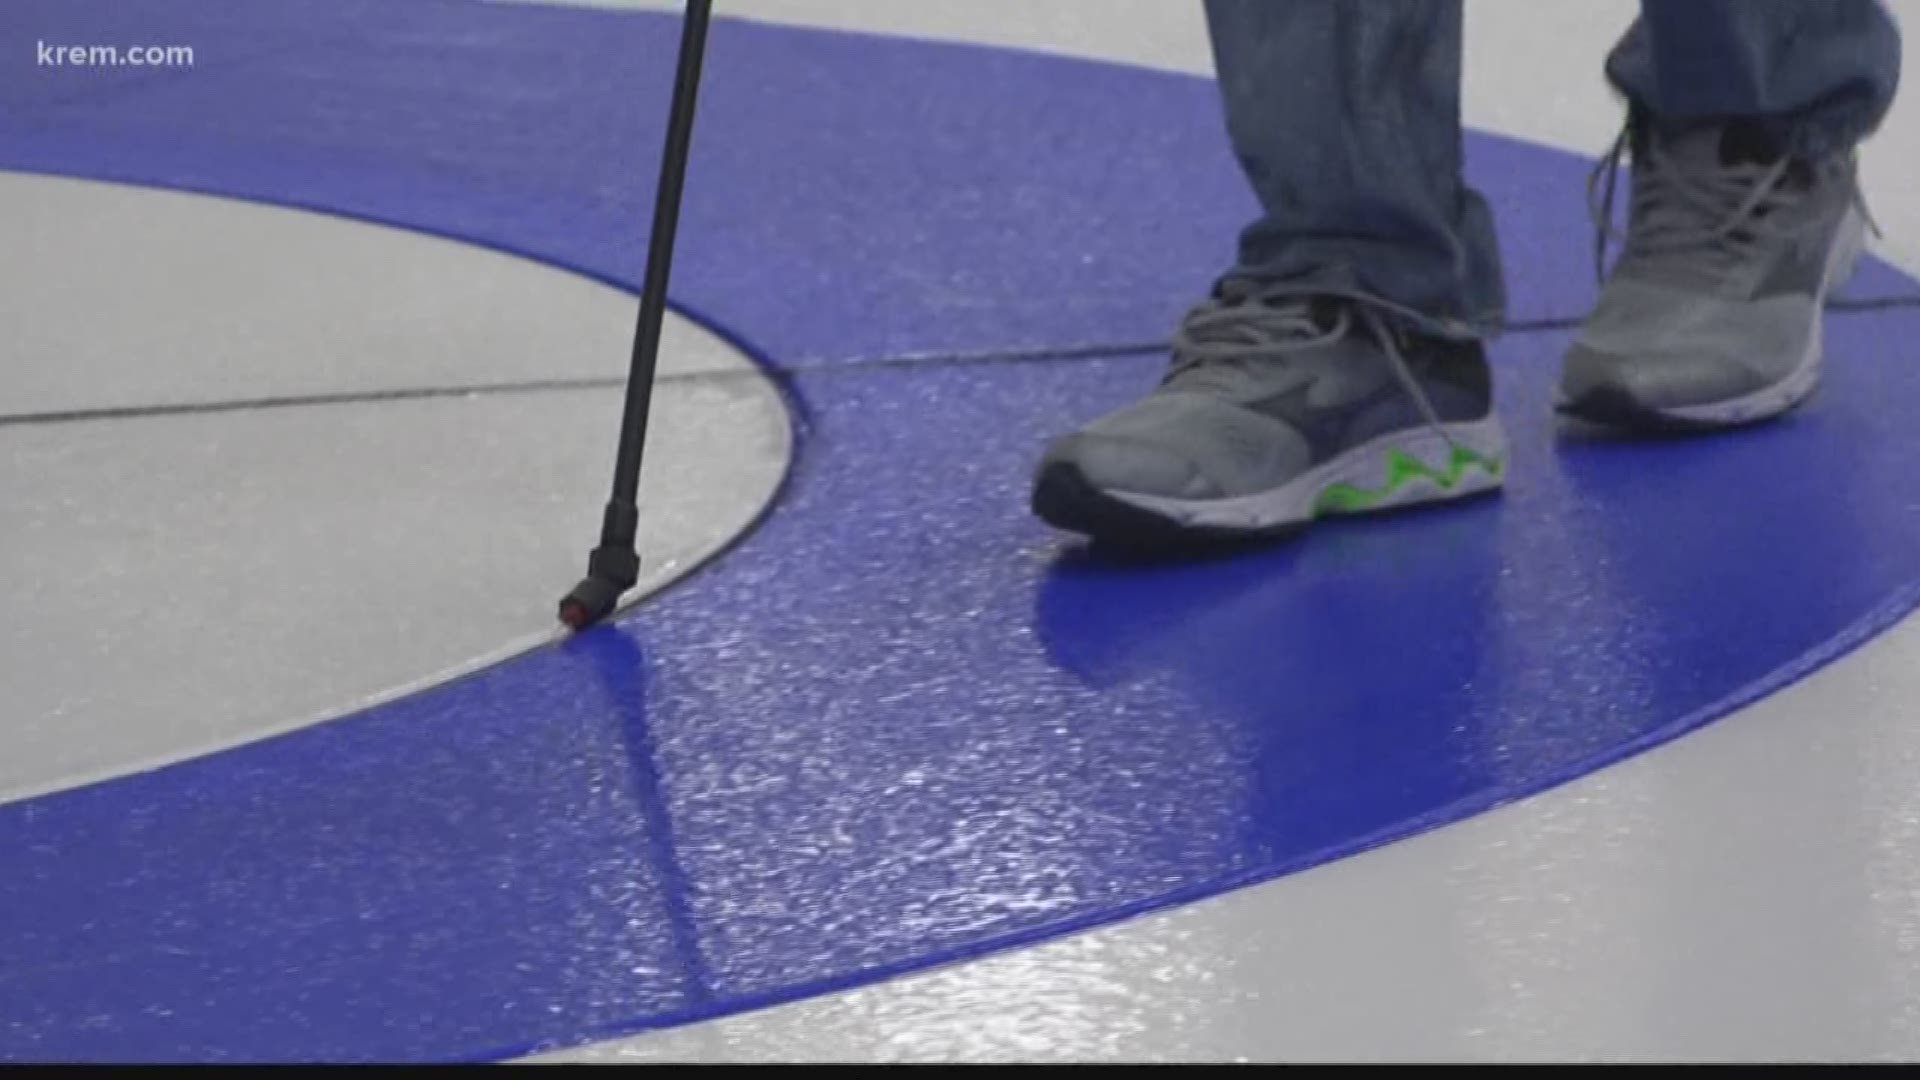 We're taking you behind the scenes of the National Curling Championships, as some of the best ice-makers in the world make their final ice preparations.